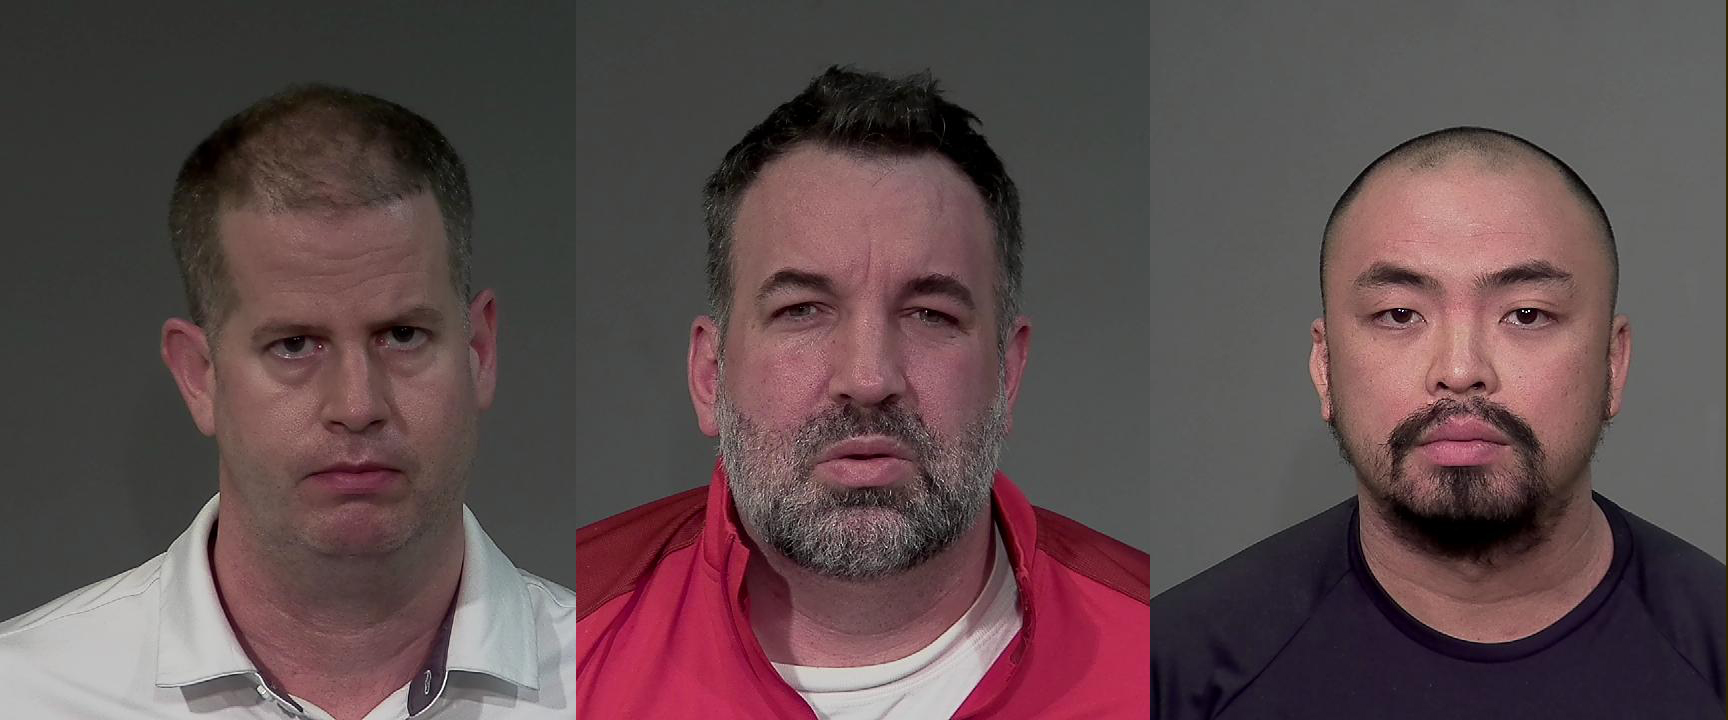 Daniel Lacasse, 43, left to right, Charles-Xavier Boislard, 43, and Robert Luu, 31, are seen in a composite of three police handout photos. Montreal police say they are looking for other possible victims after three high school coaches at Ecole Saint-Laurent, a St-Laurent borough high school, were arrested this week on sex crime charges. THE CANADIAN PRESS/HO-Police Service of Montreal, *MANDATORY CREDIT*